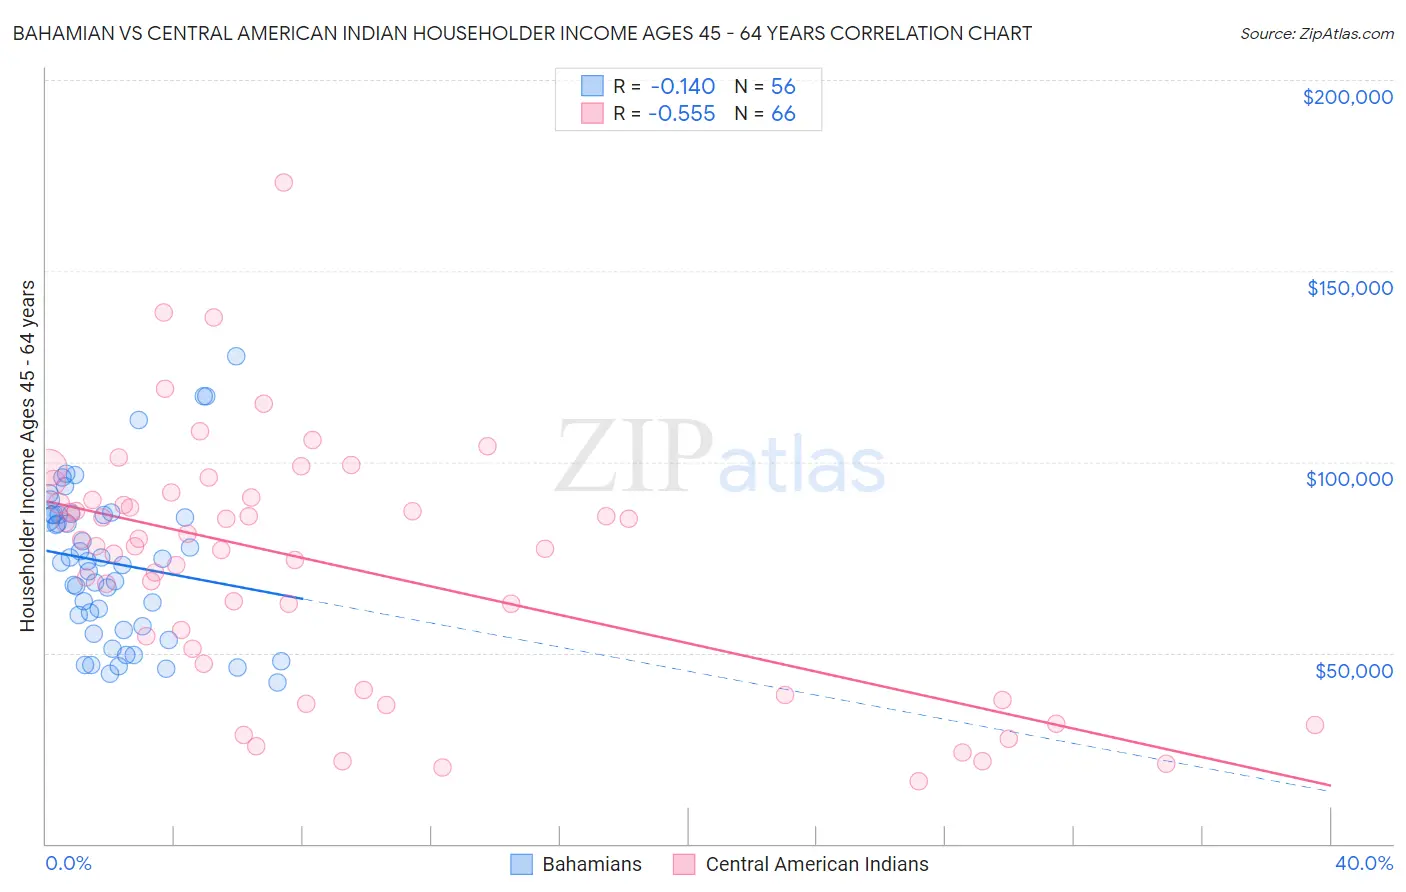 Bahamian vs Central American Indian Householder Income Ages 45 - 64 years